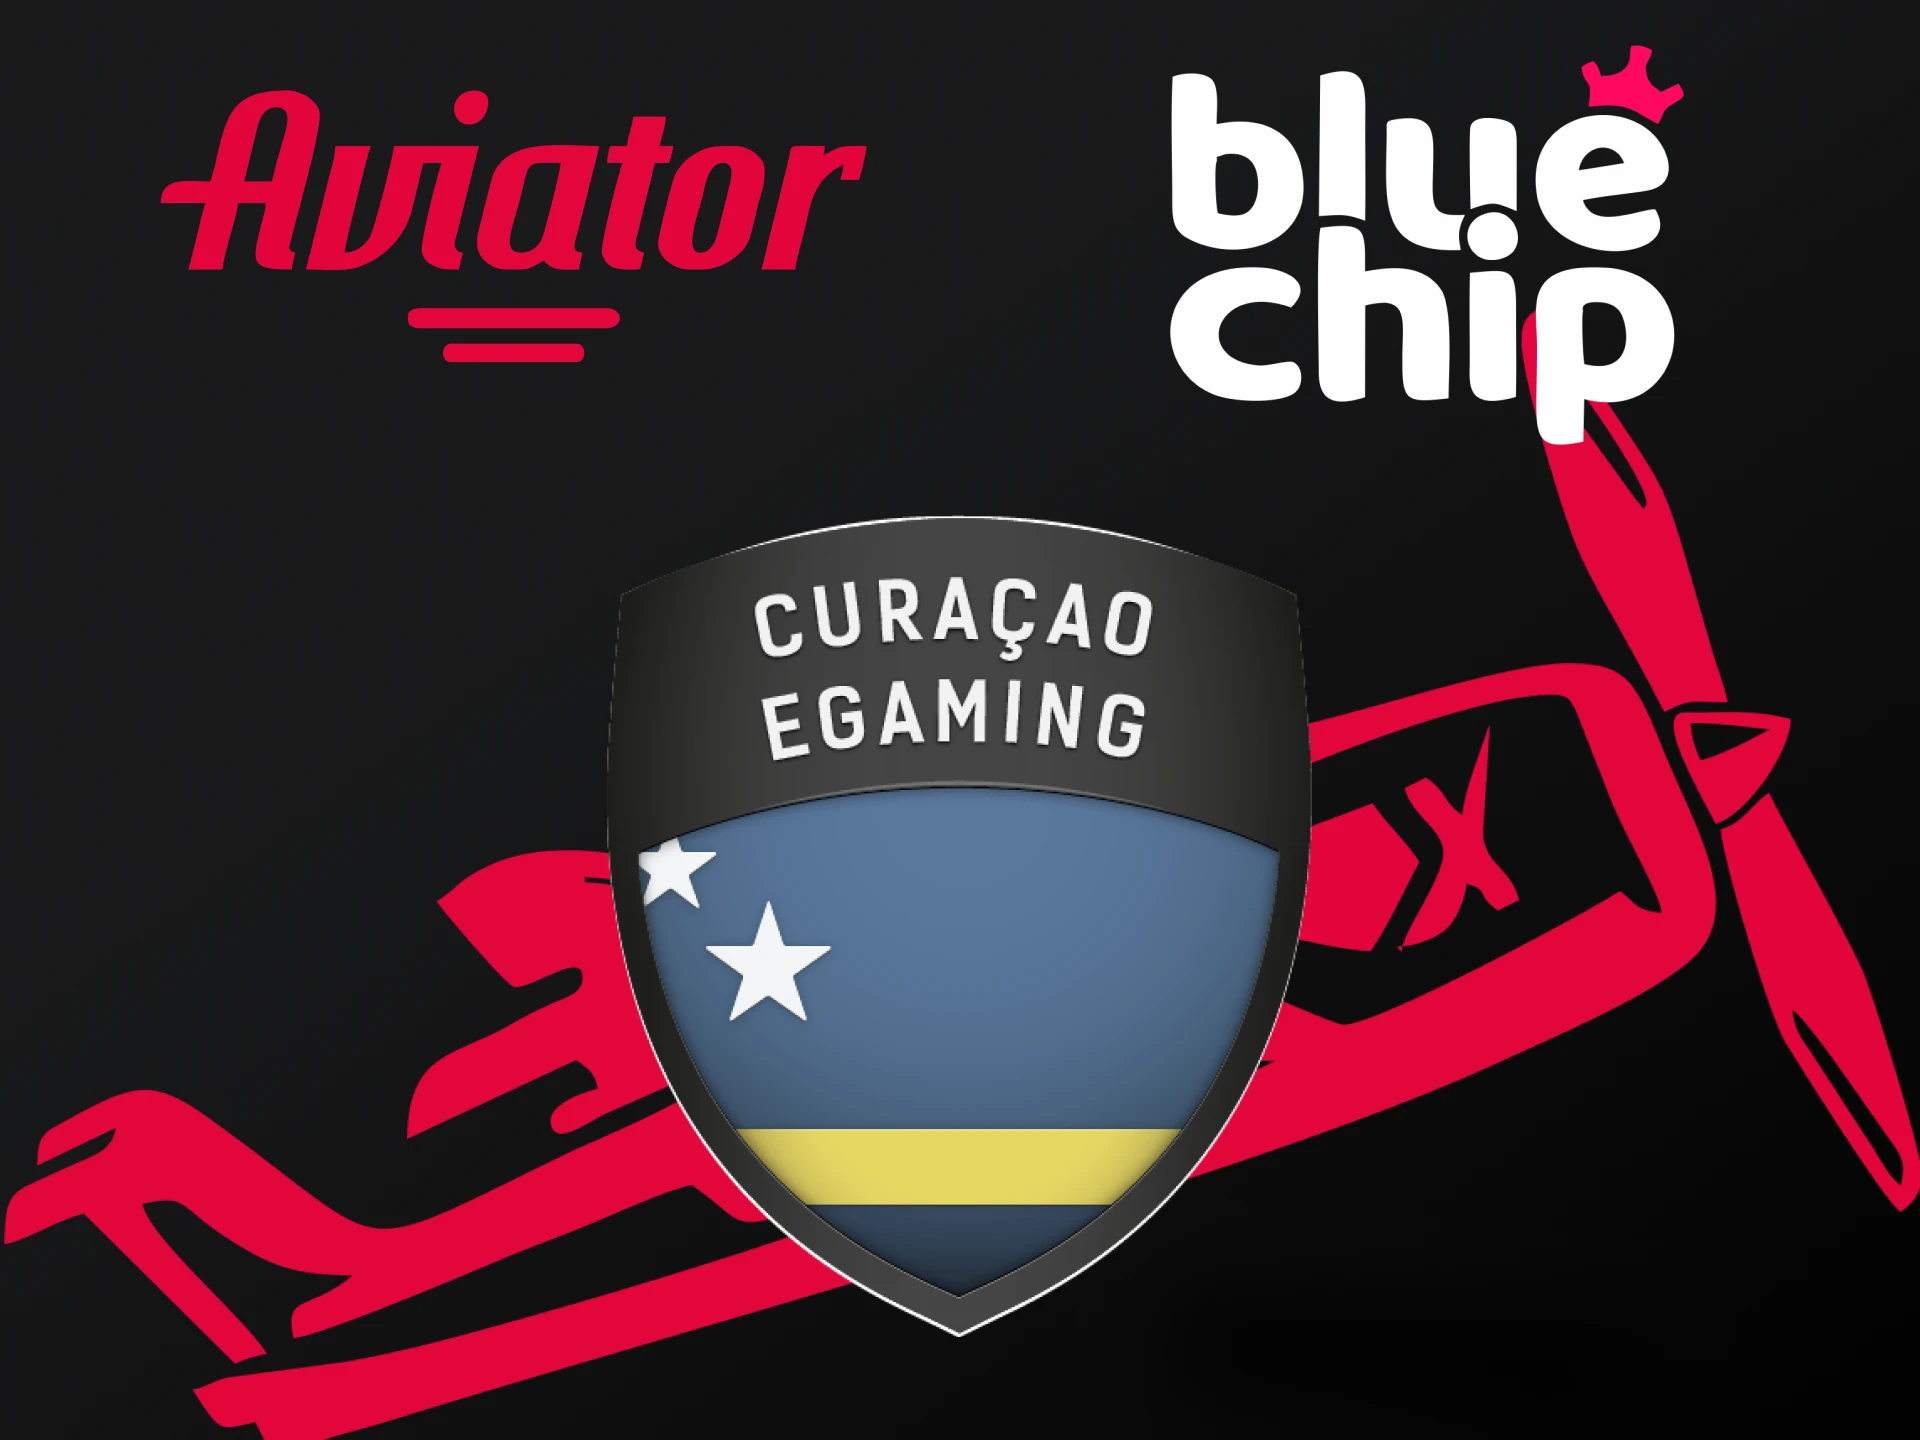 It is absolutely legal to play Aviator on Bluechip.